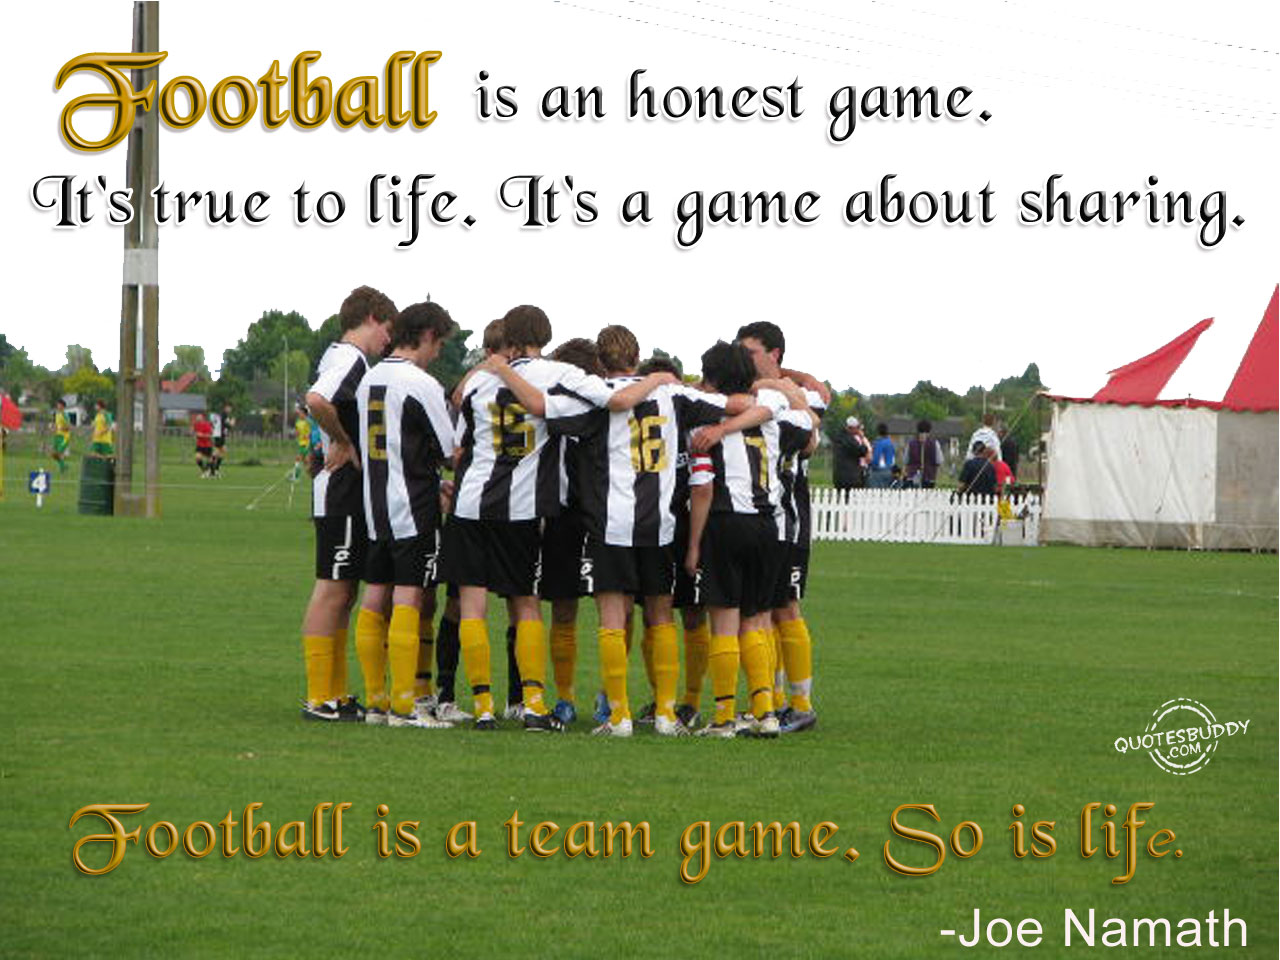 Football is an honest game. It's true to life. It's a game about sharing. Football is a team game. So is life. Joe Namath